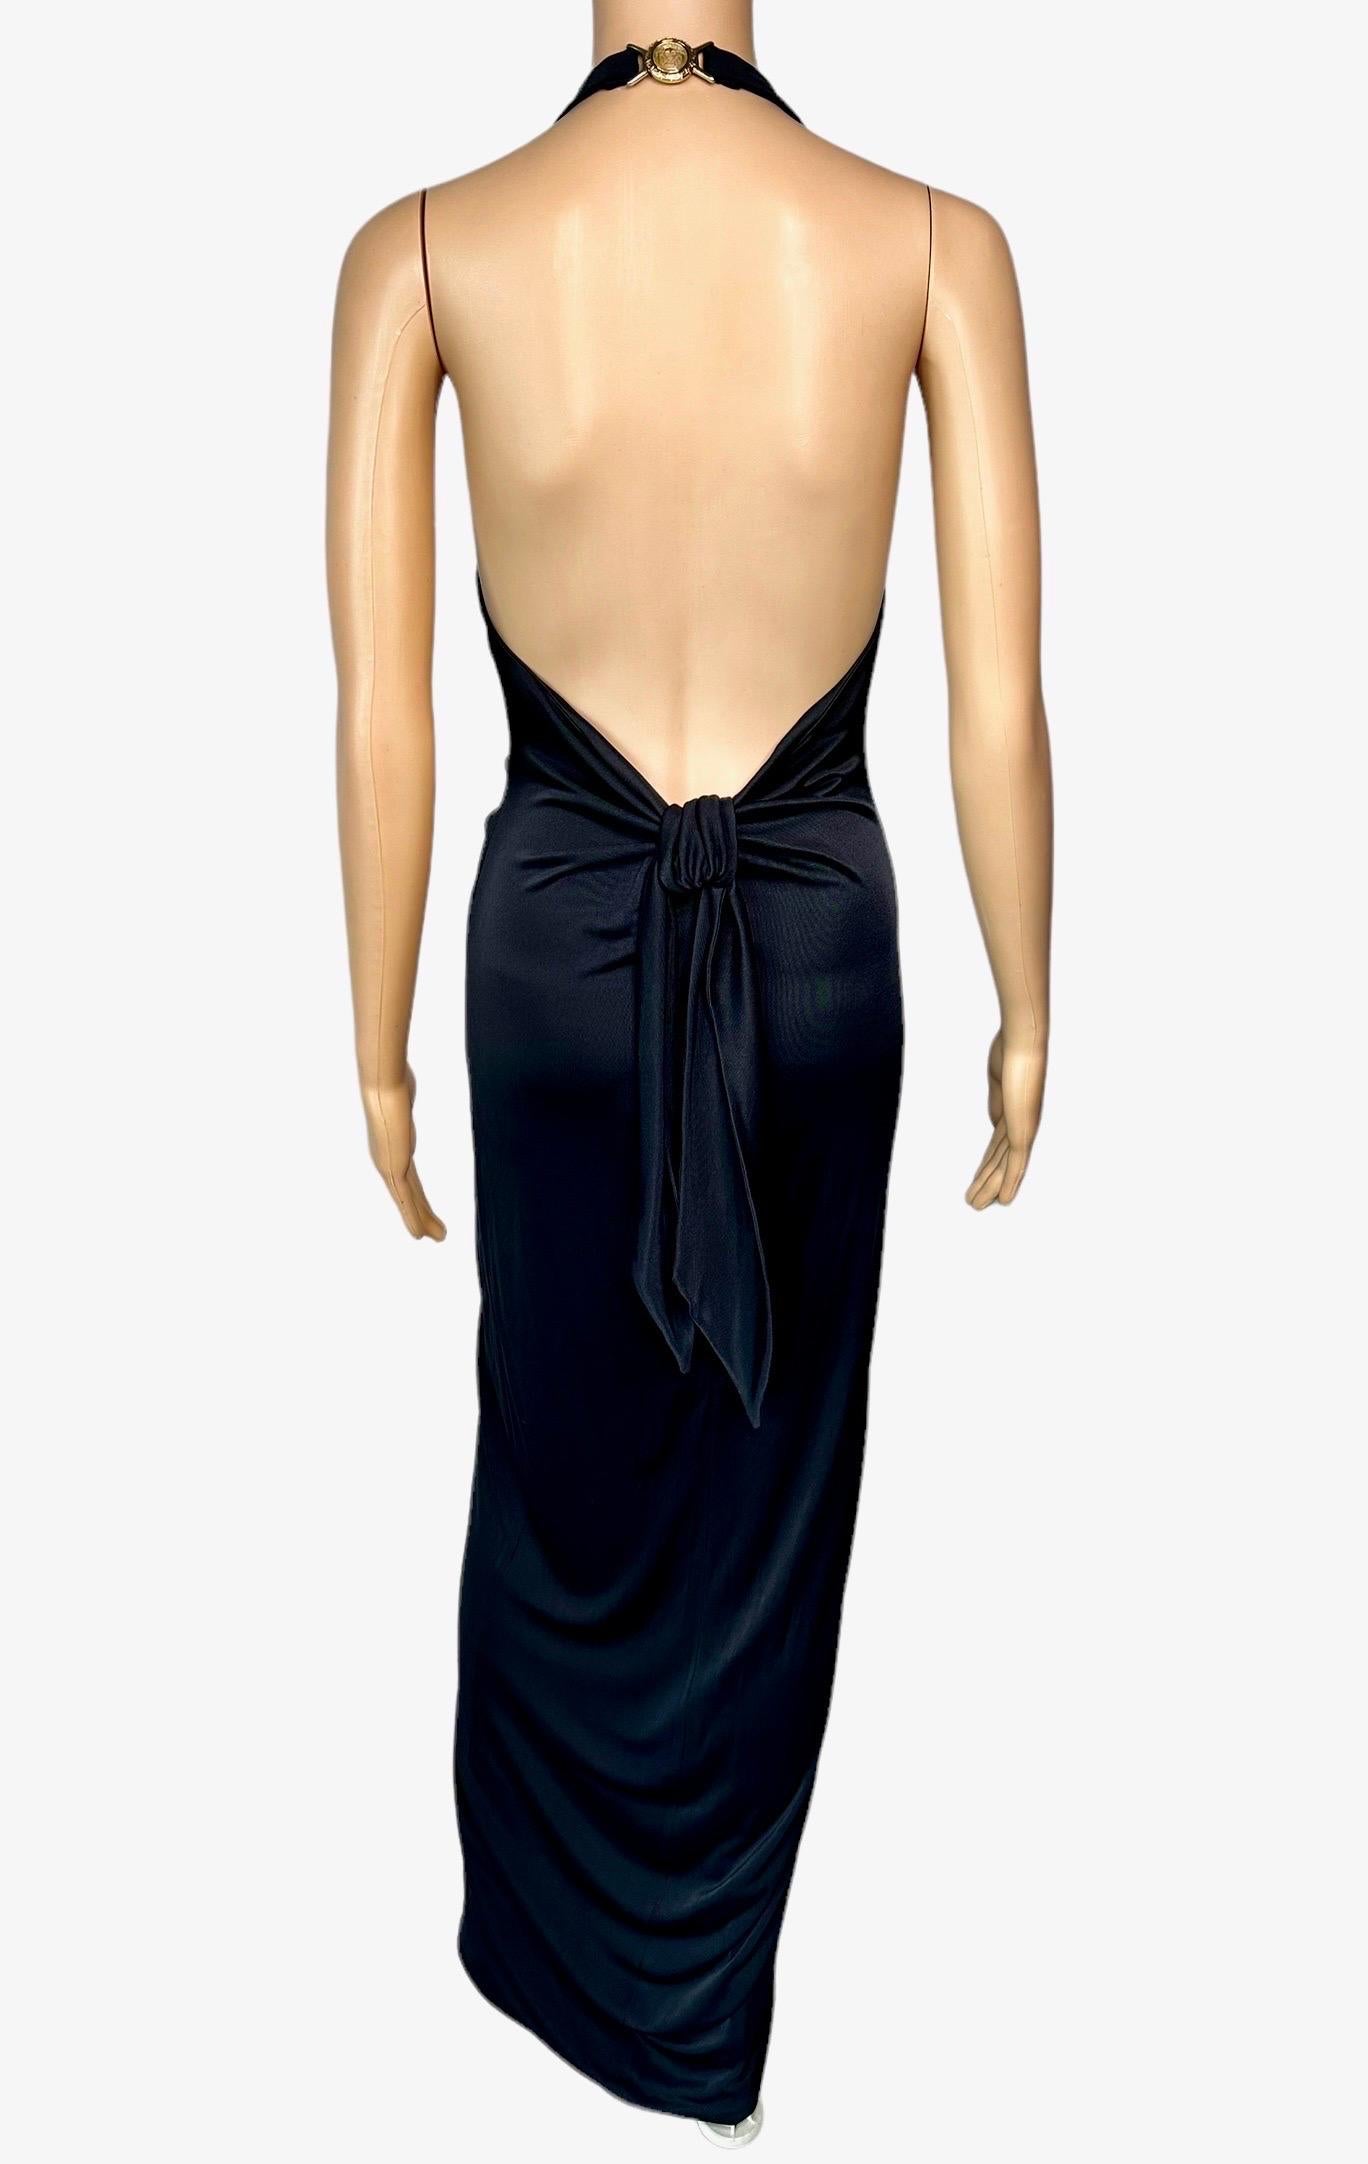 Versace S/S 2005 Runway Plunging Hi-Low Ruched Open Back Evening Dress Gown 3